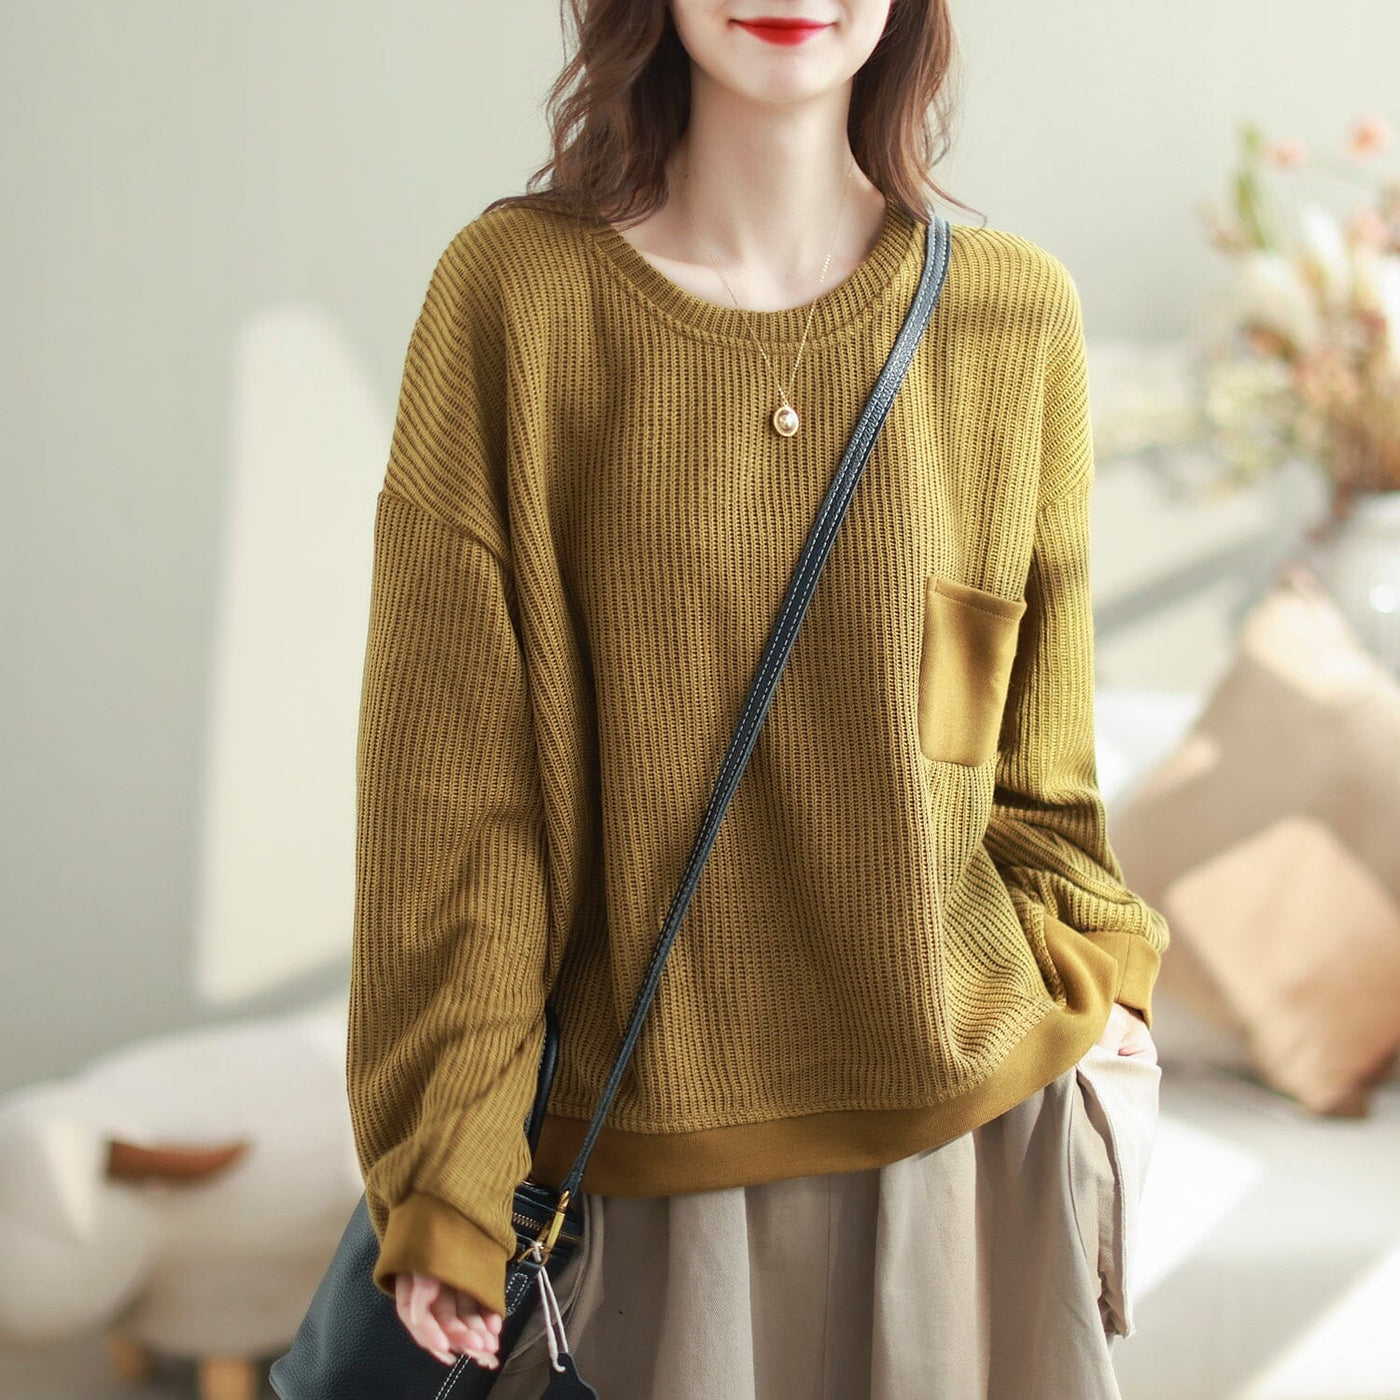 Women Casual Fashion Cotton Loose Knitted Sweater